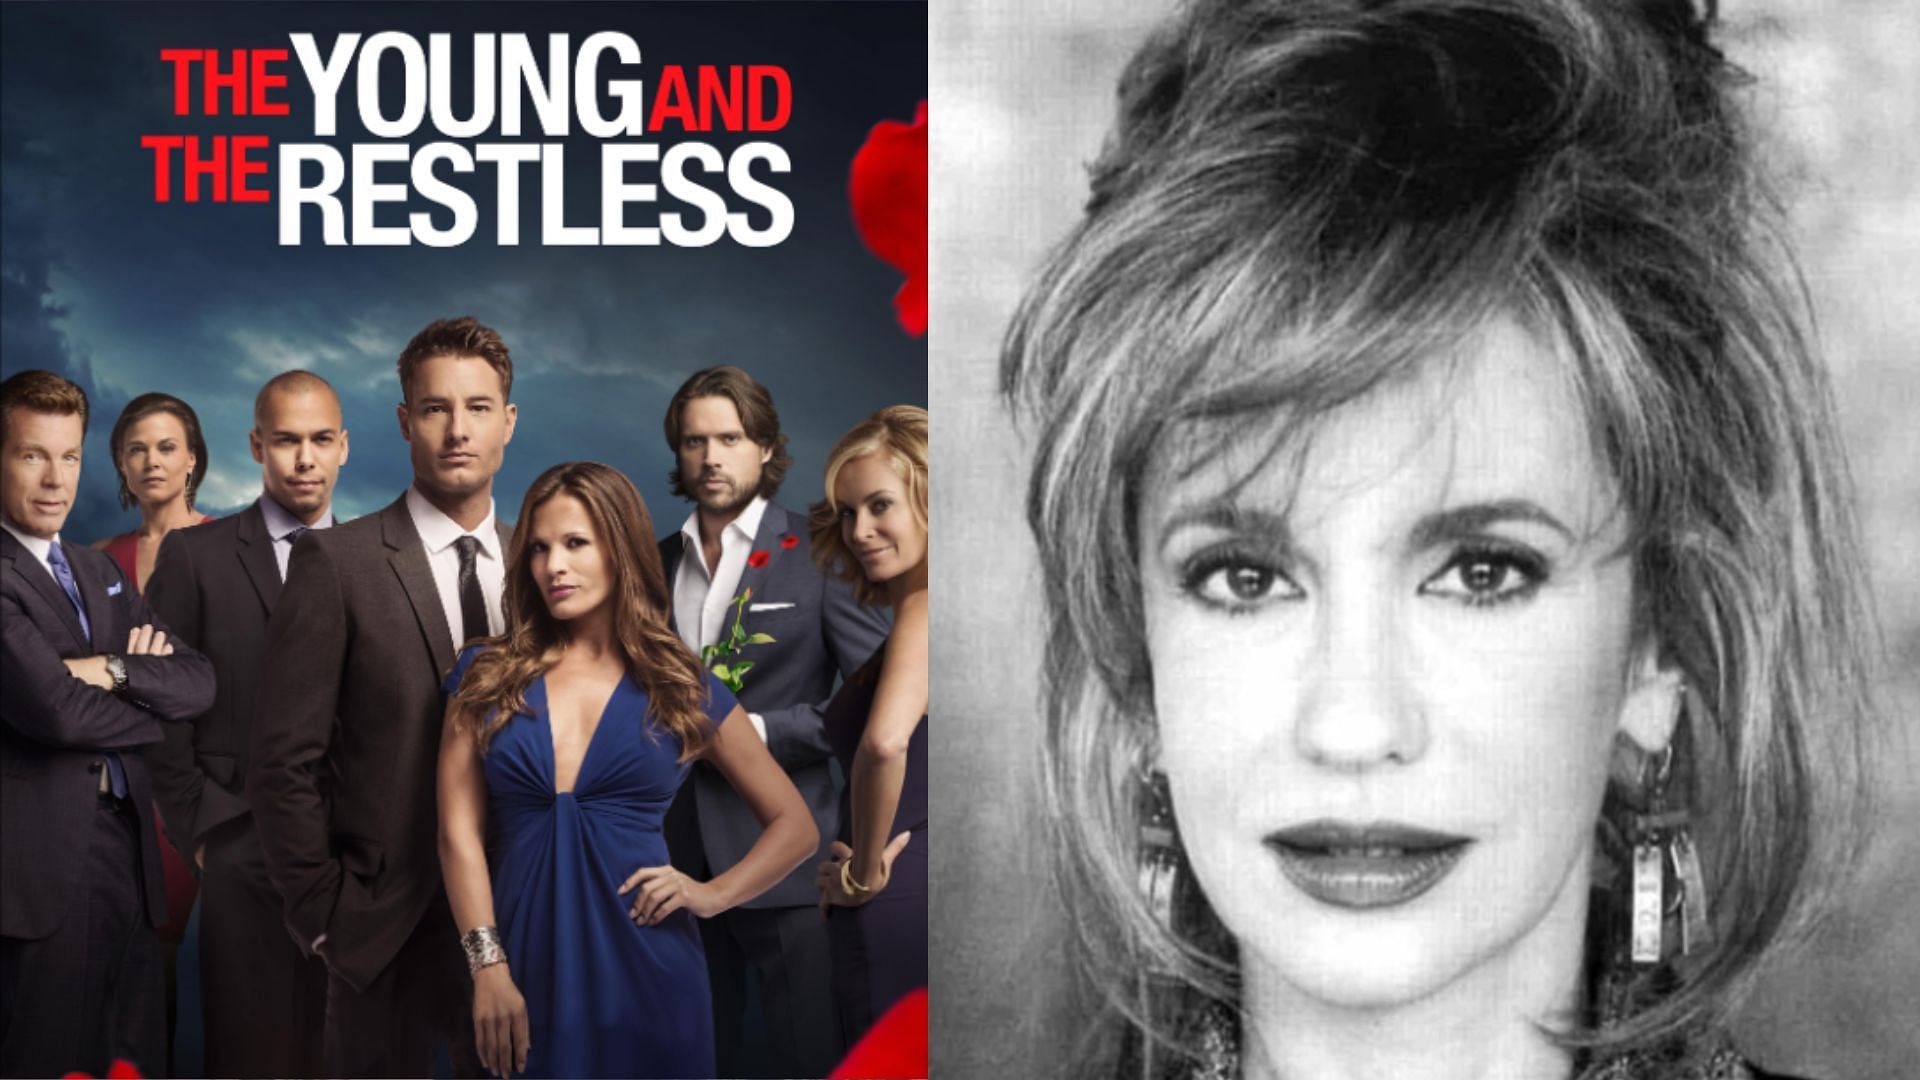  Jess Walton on The Young and the Restless 